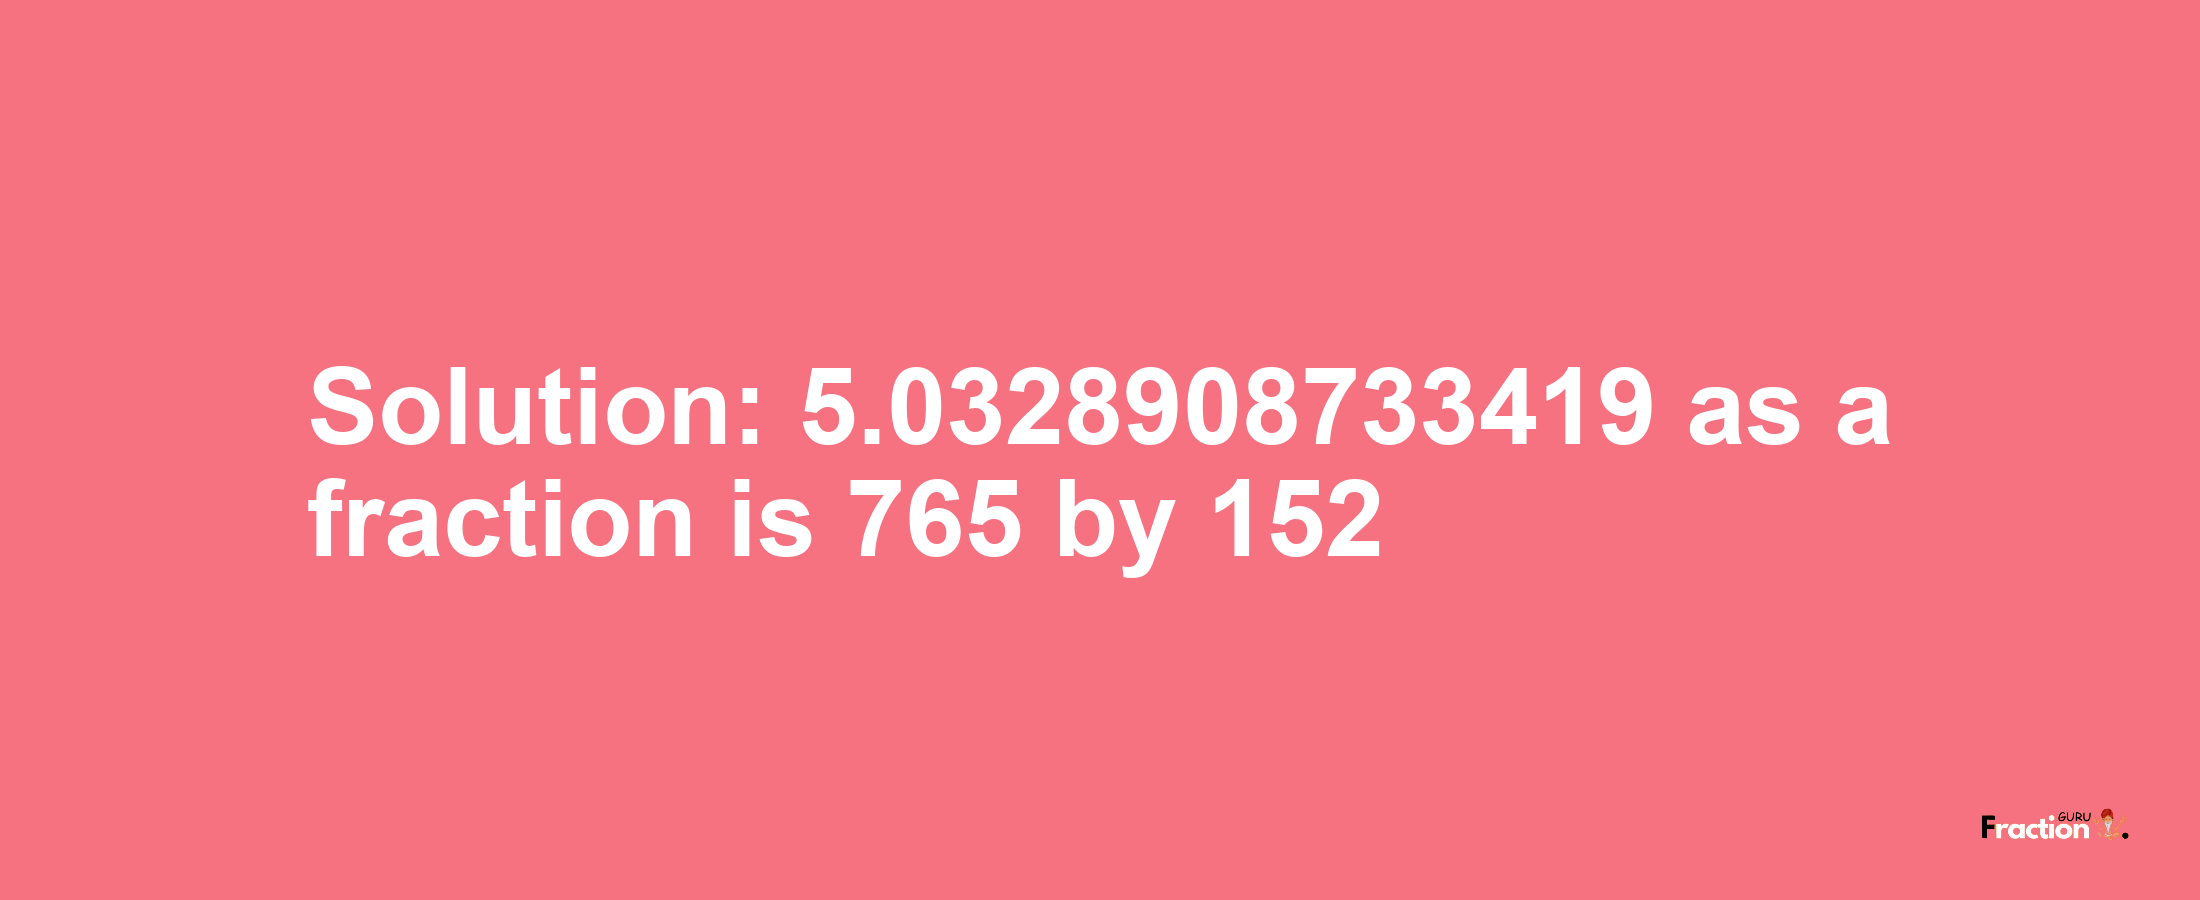 Solution:5.0328908733419 as a fraction is 765/152